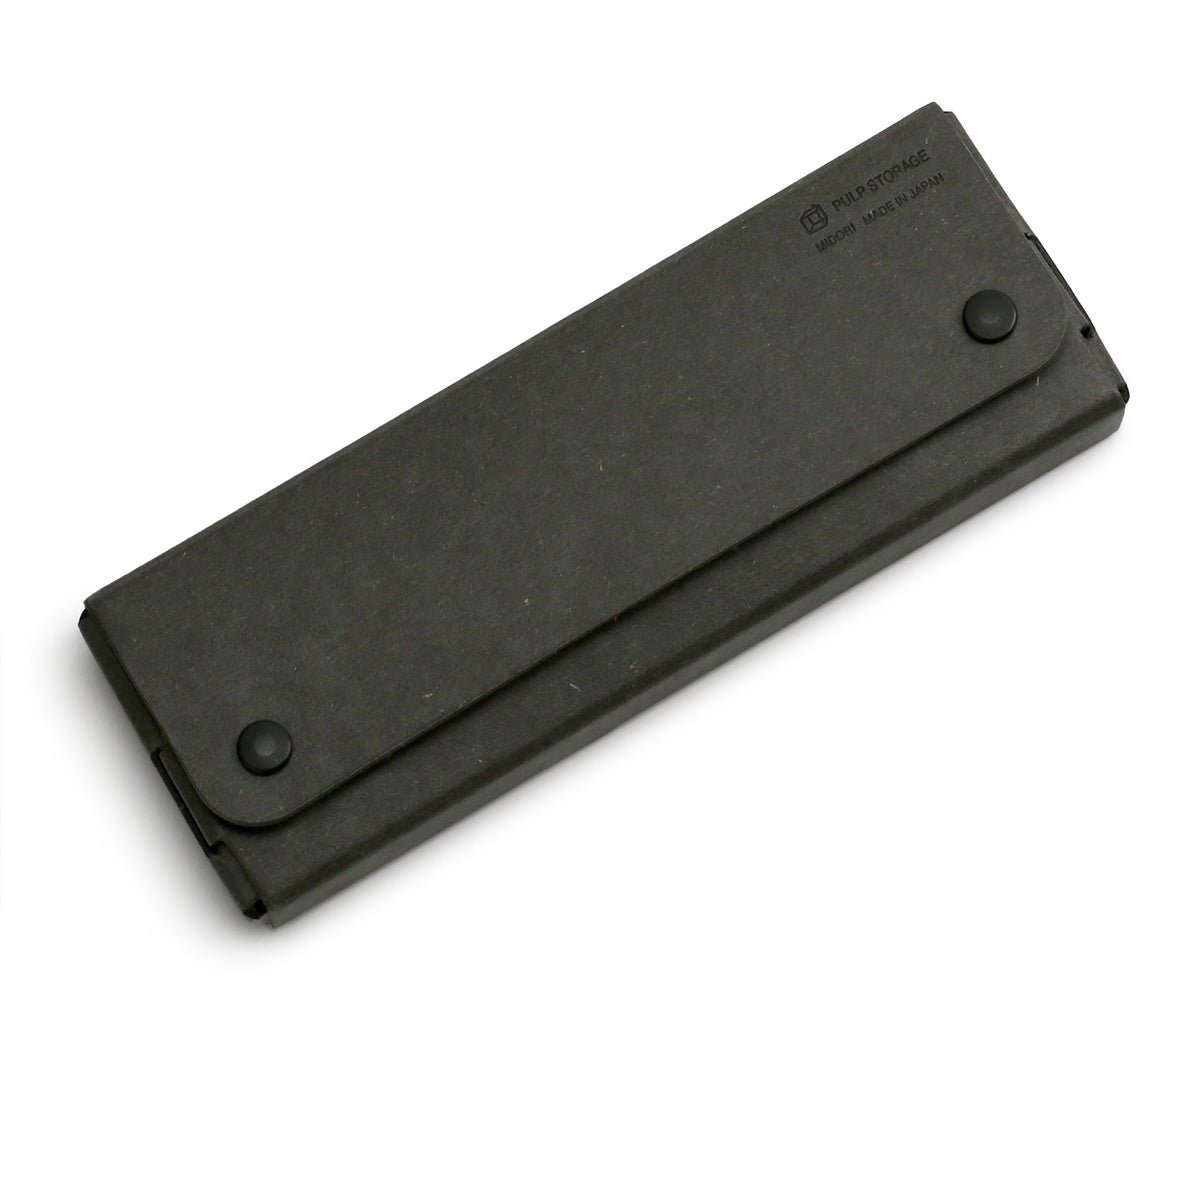 Black pencil case is actually dark grey, made from paper pulp - its a hard finish folded into a protective pencil case with stud closures